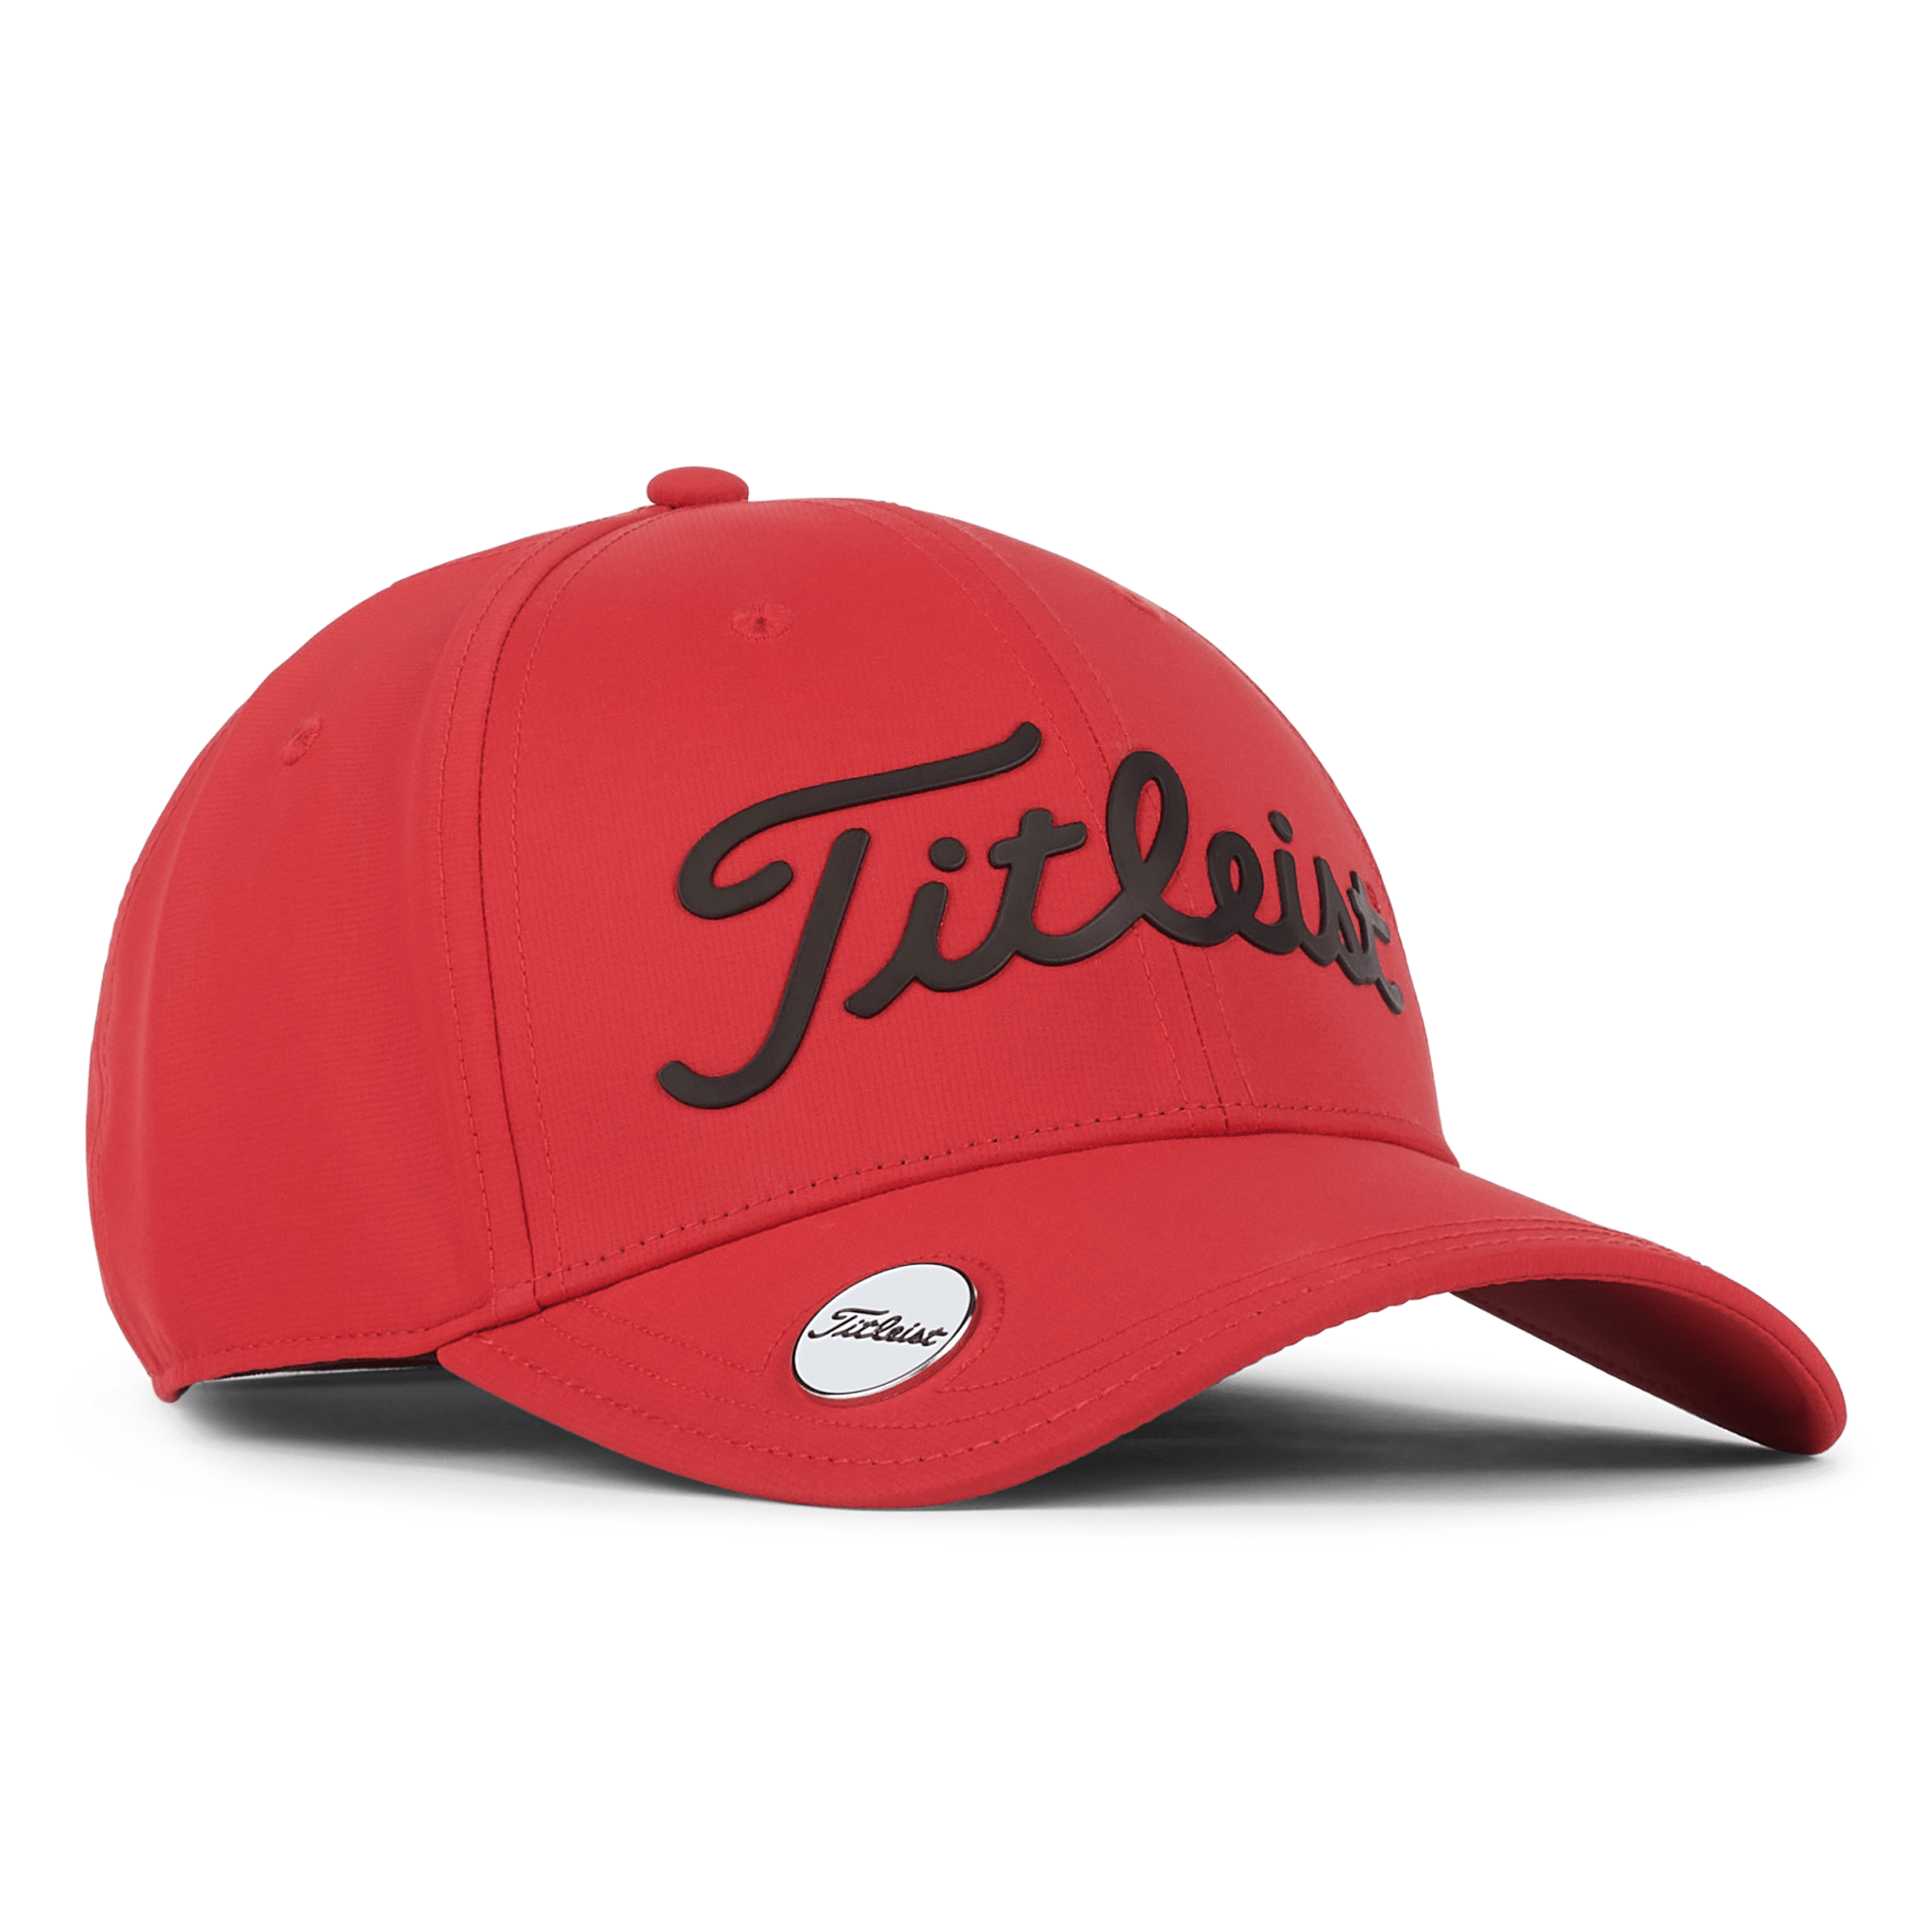 Titleist Official Players Performance Ball Marker in Red/Black